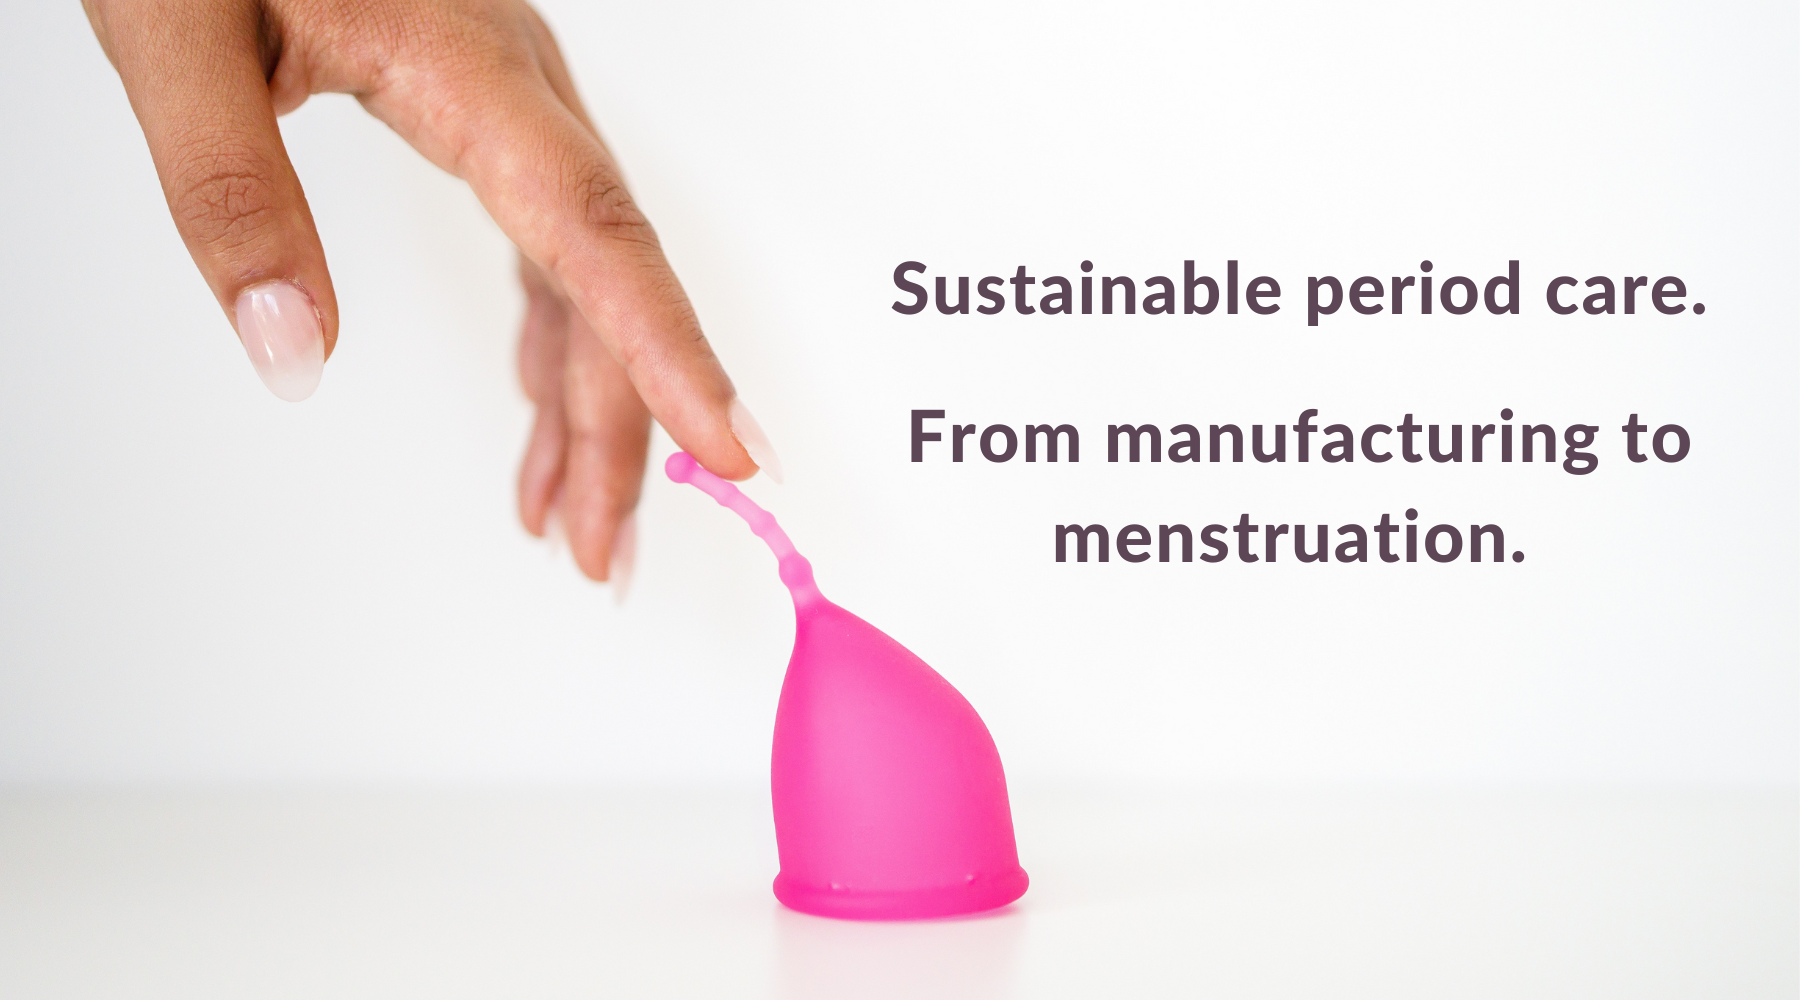 Sustainable period care. From manufacturing to menstruation. With Kind menstrual cup. Image of a Black woman's hand gently touching the soft, flexible, long removal stem of Kind Cup with ergonomic curves and design.